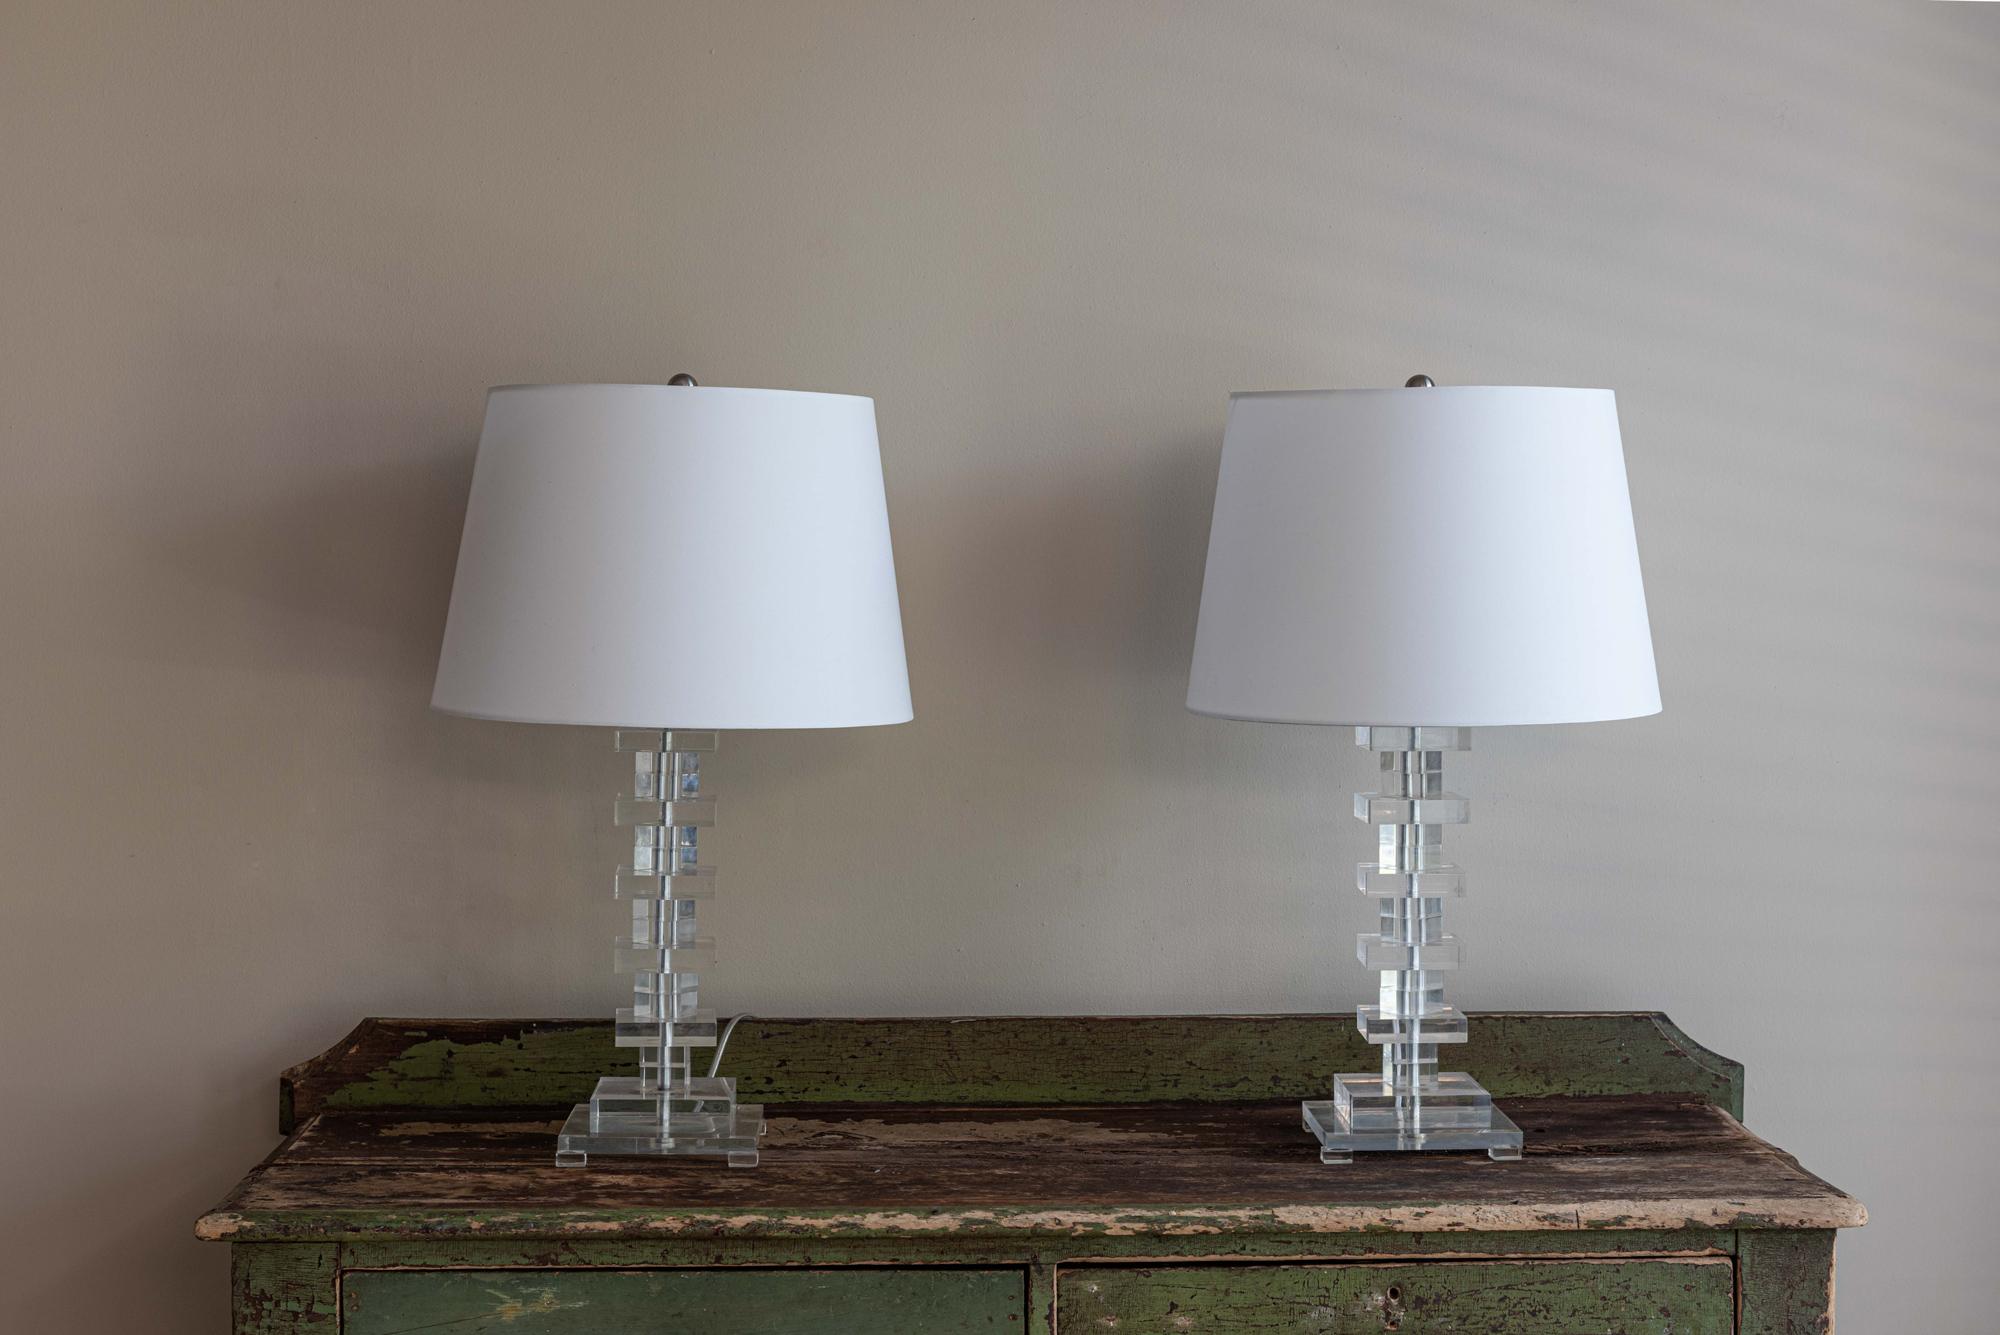 Circa 1970

Pair Mid Century Lucite table lamps with lamp shades

Measure: H63 x D15.5 x W15.5 cm (Base)
Shades diameter 38cm.

 